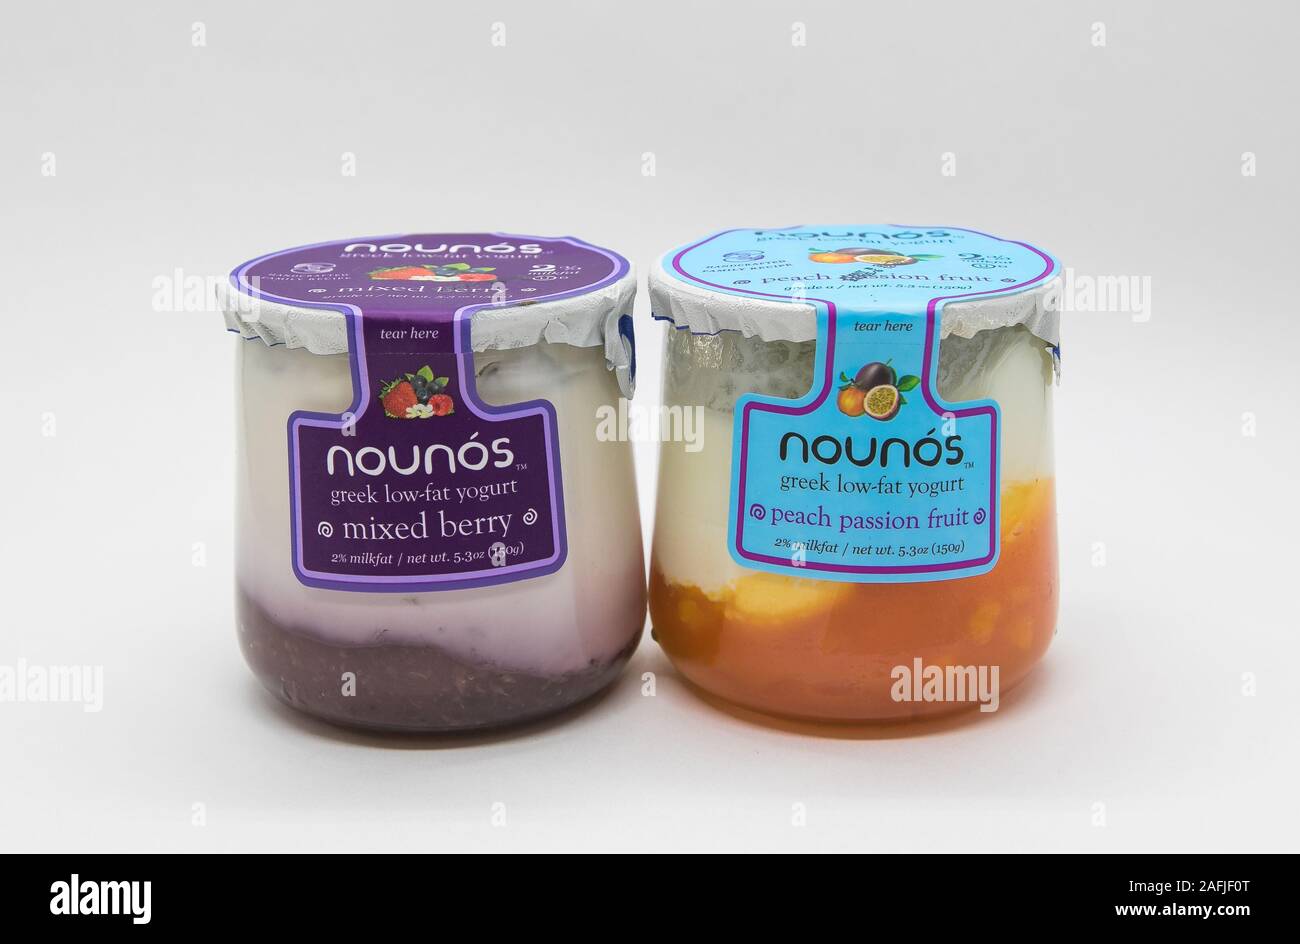 New York, 12/8/2019: Glass containers of Nounos yogurt stand against white background. Stock Photo